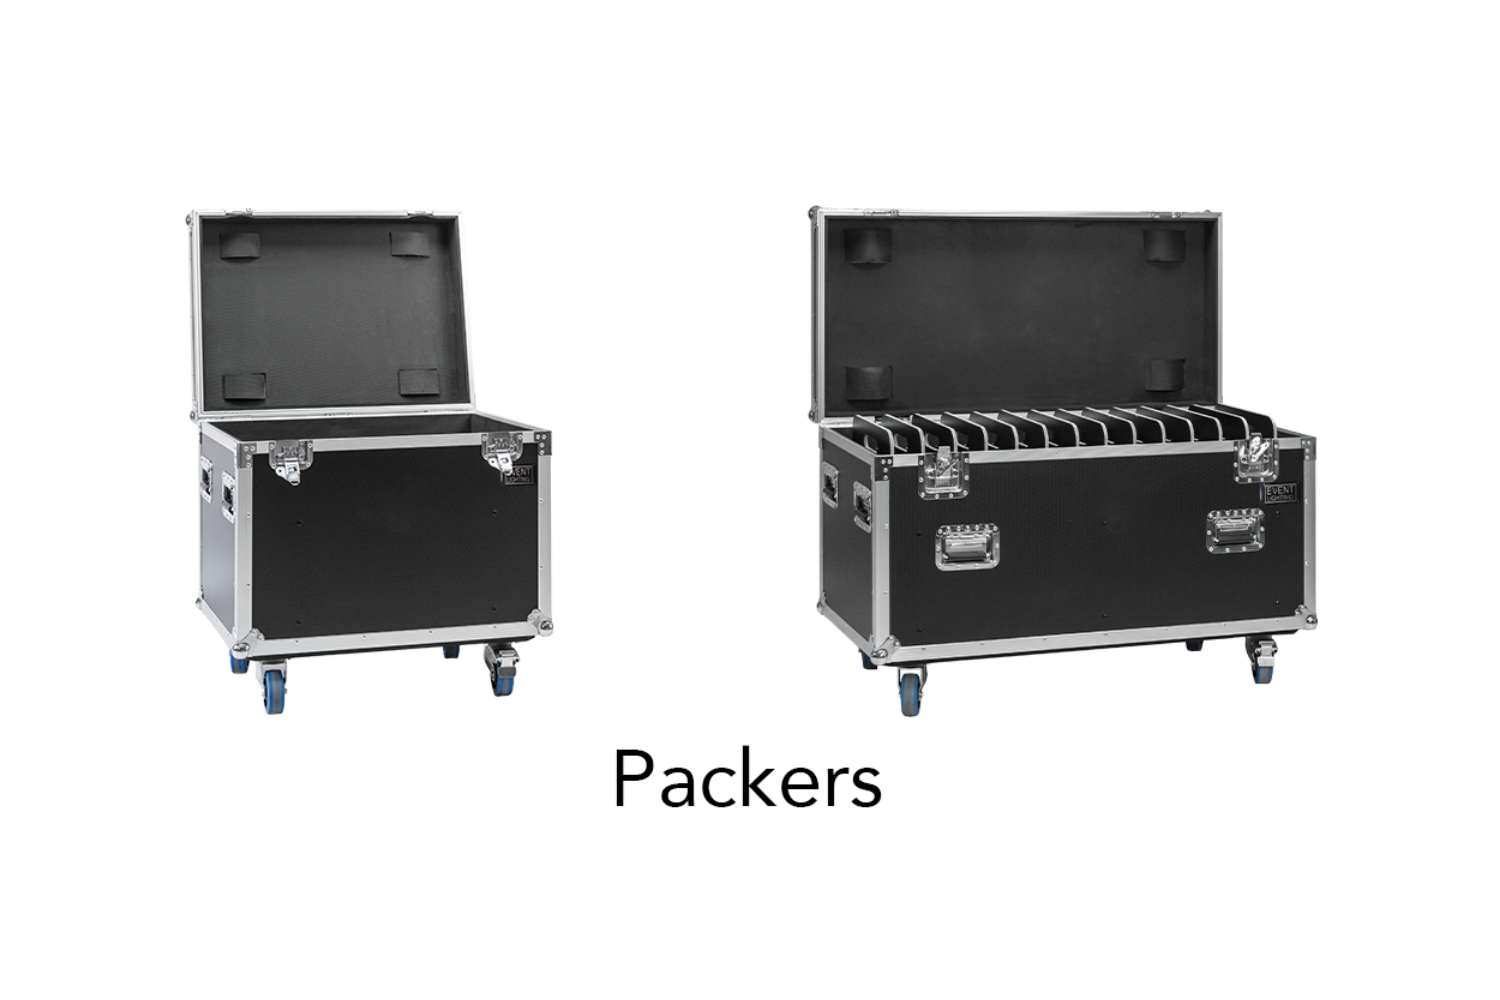 Event Lighting Packers are Back in Stock!